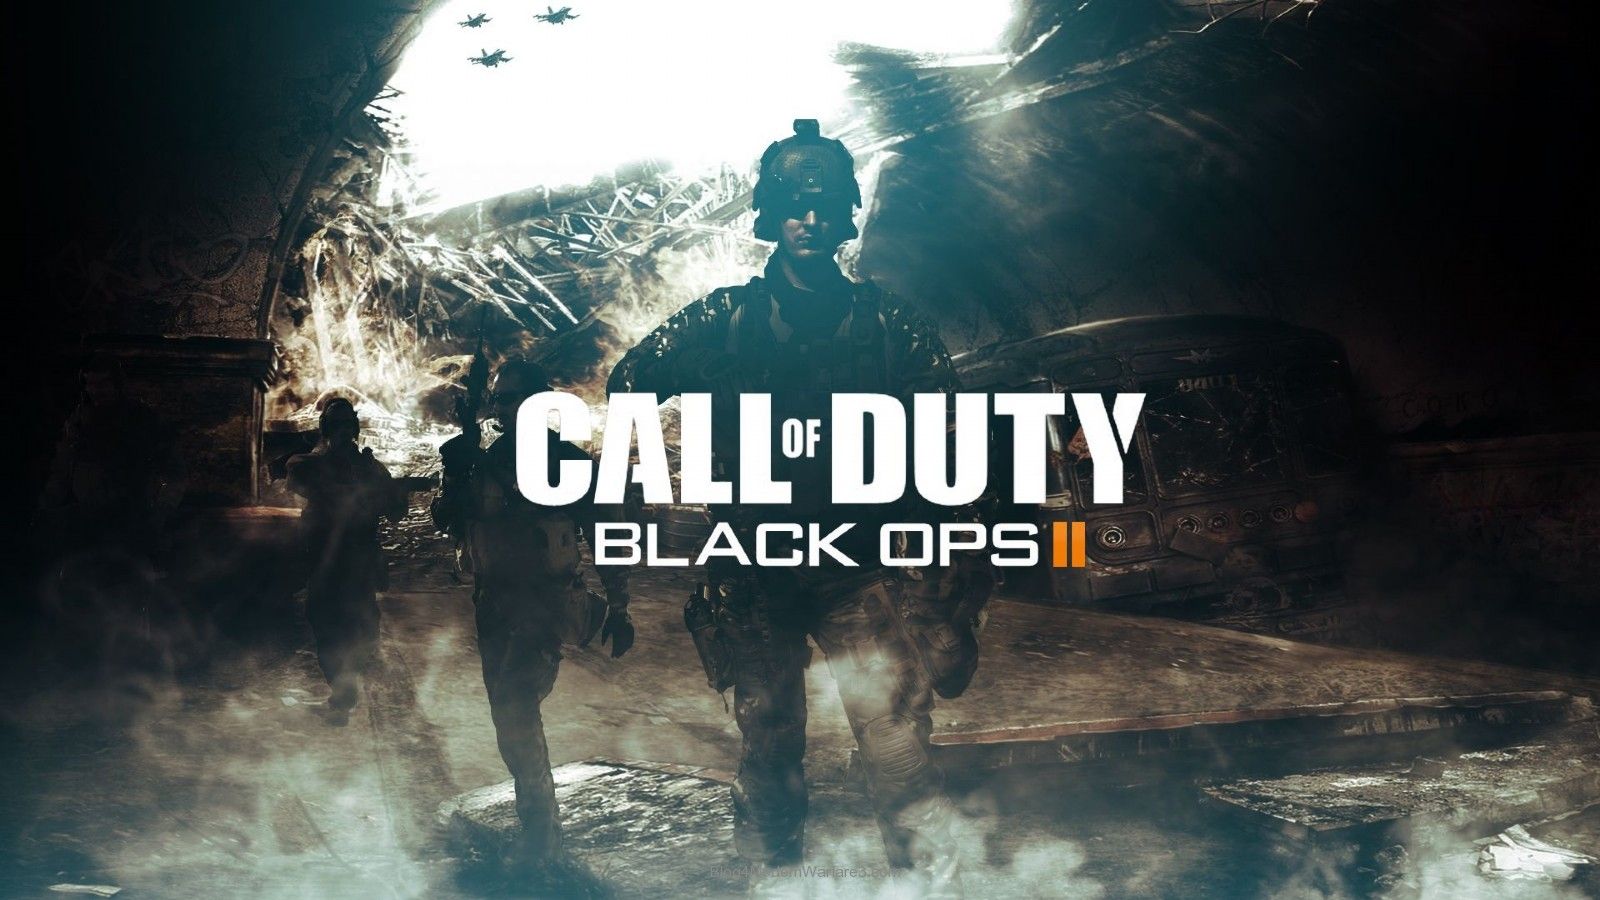 New Wallpaper Background For Call Of Duty Black Ops 2 Image | GamesHD